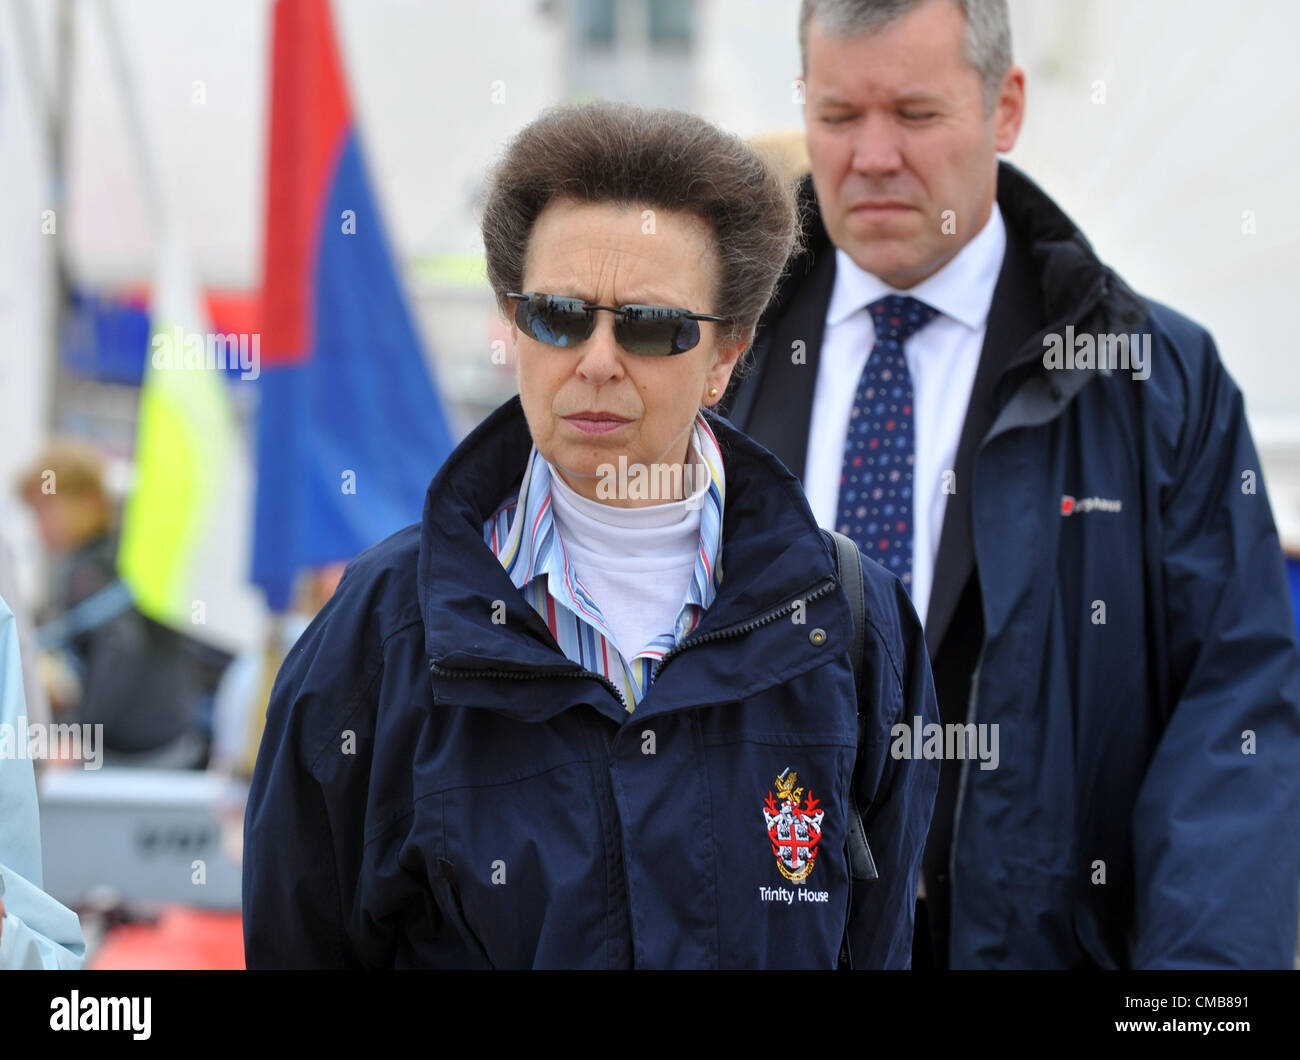 Princess Anne attending a schools regatta at the Weymouth and Portland National Sailing Academy, Dorset. Britain. 09/07/2012 PICTURE BY: DORSET MEDIA SERVICE Stock Photo